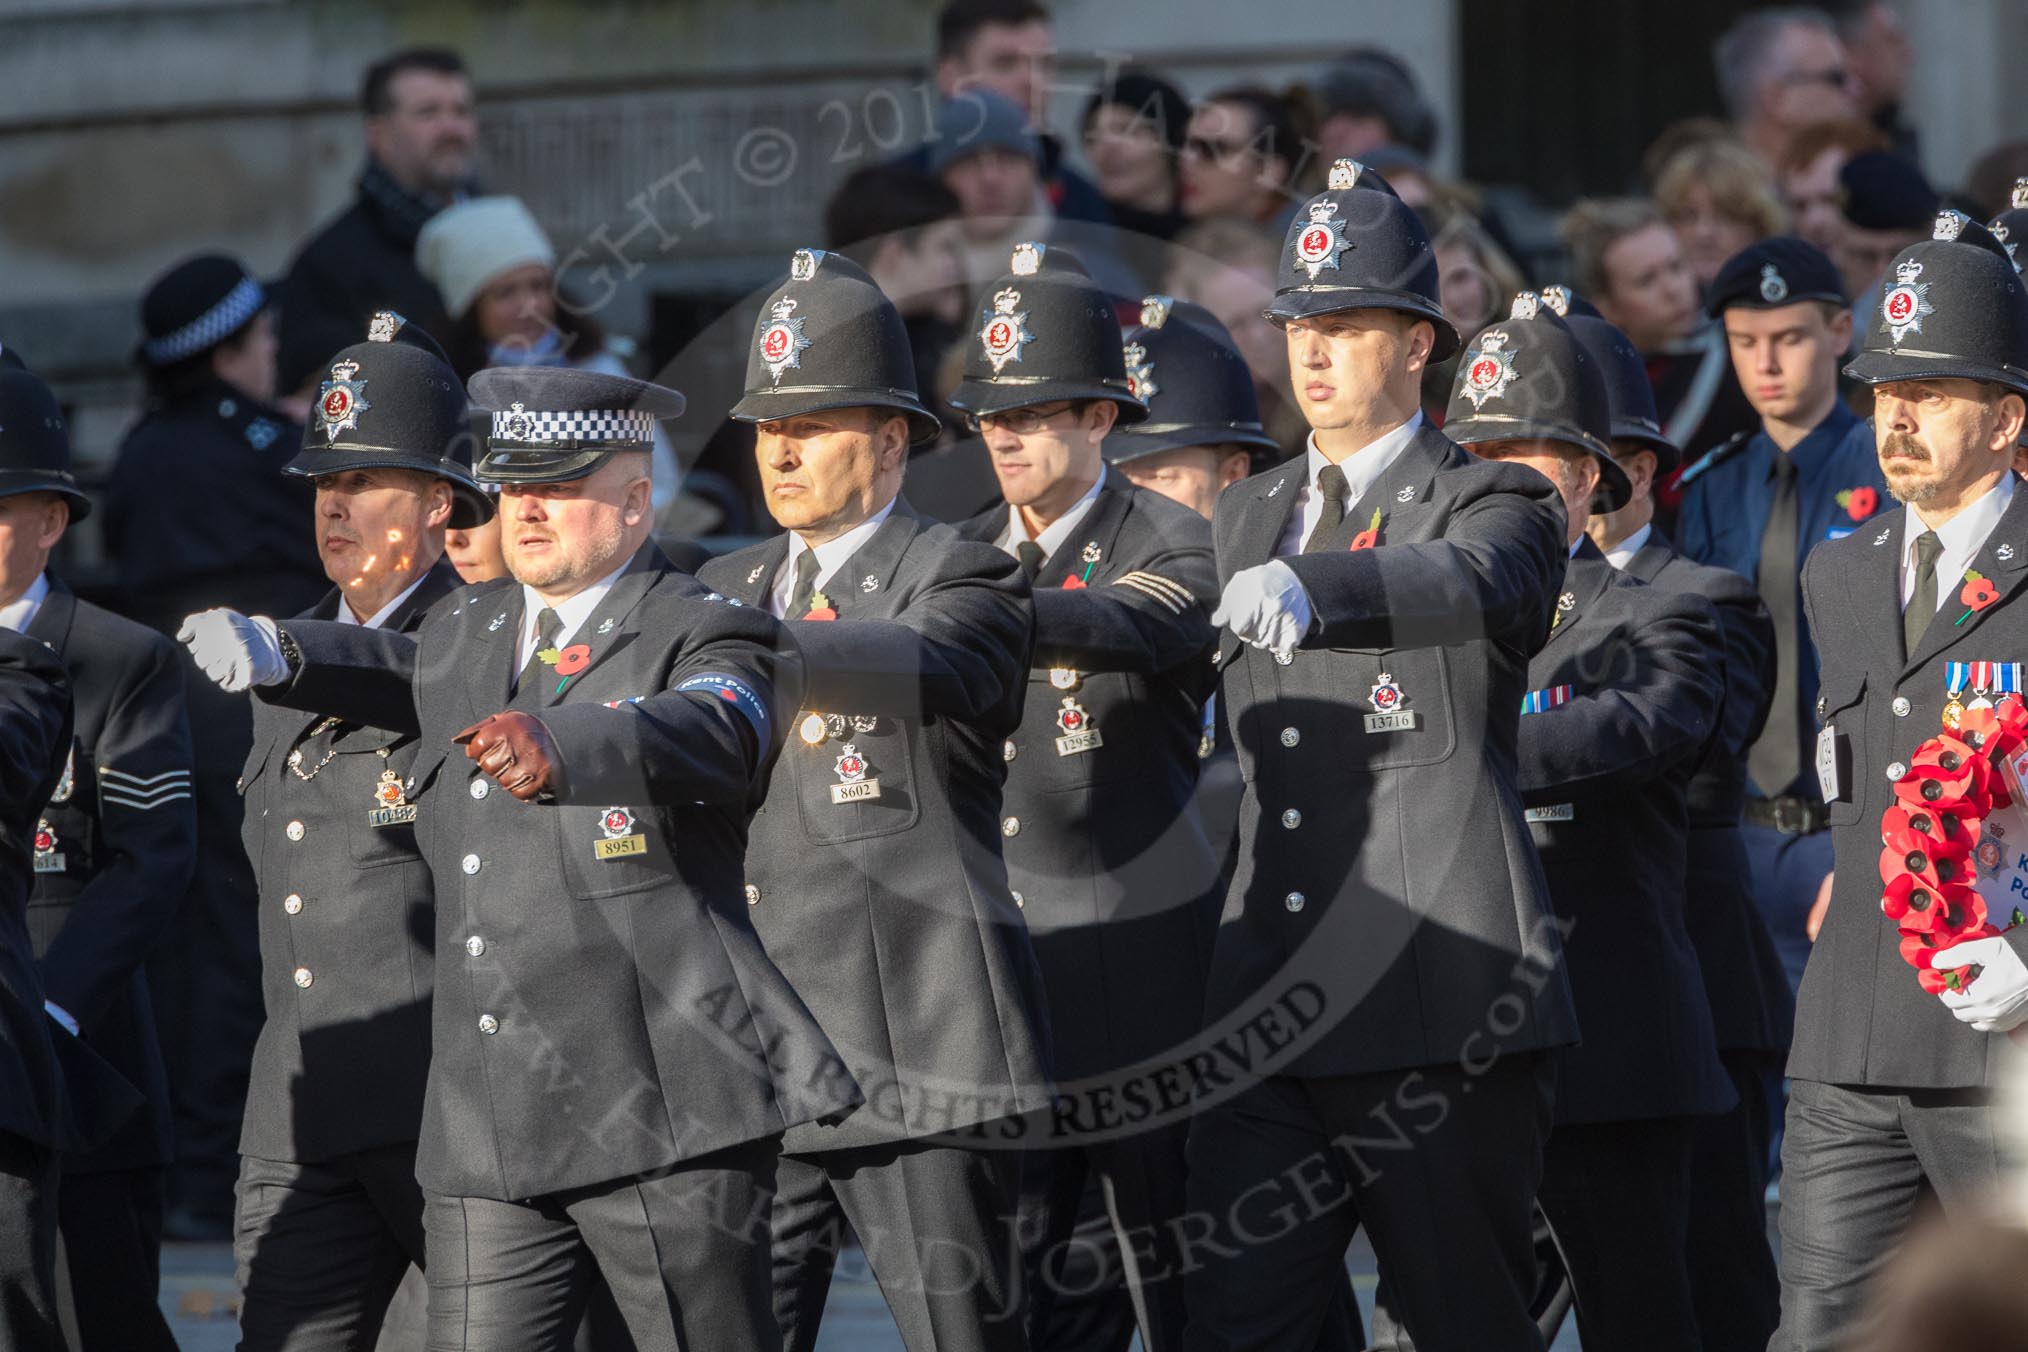 March Past, Remembrance Sunday at the Cenotaph 2016: M39 Kent Police.
Cenotaph, Whitehall, London SW1,
London,
Greater London,
United Kingdom,
on 13 November 2016 at 13:19, image #2931